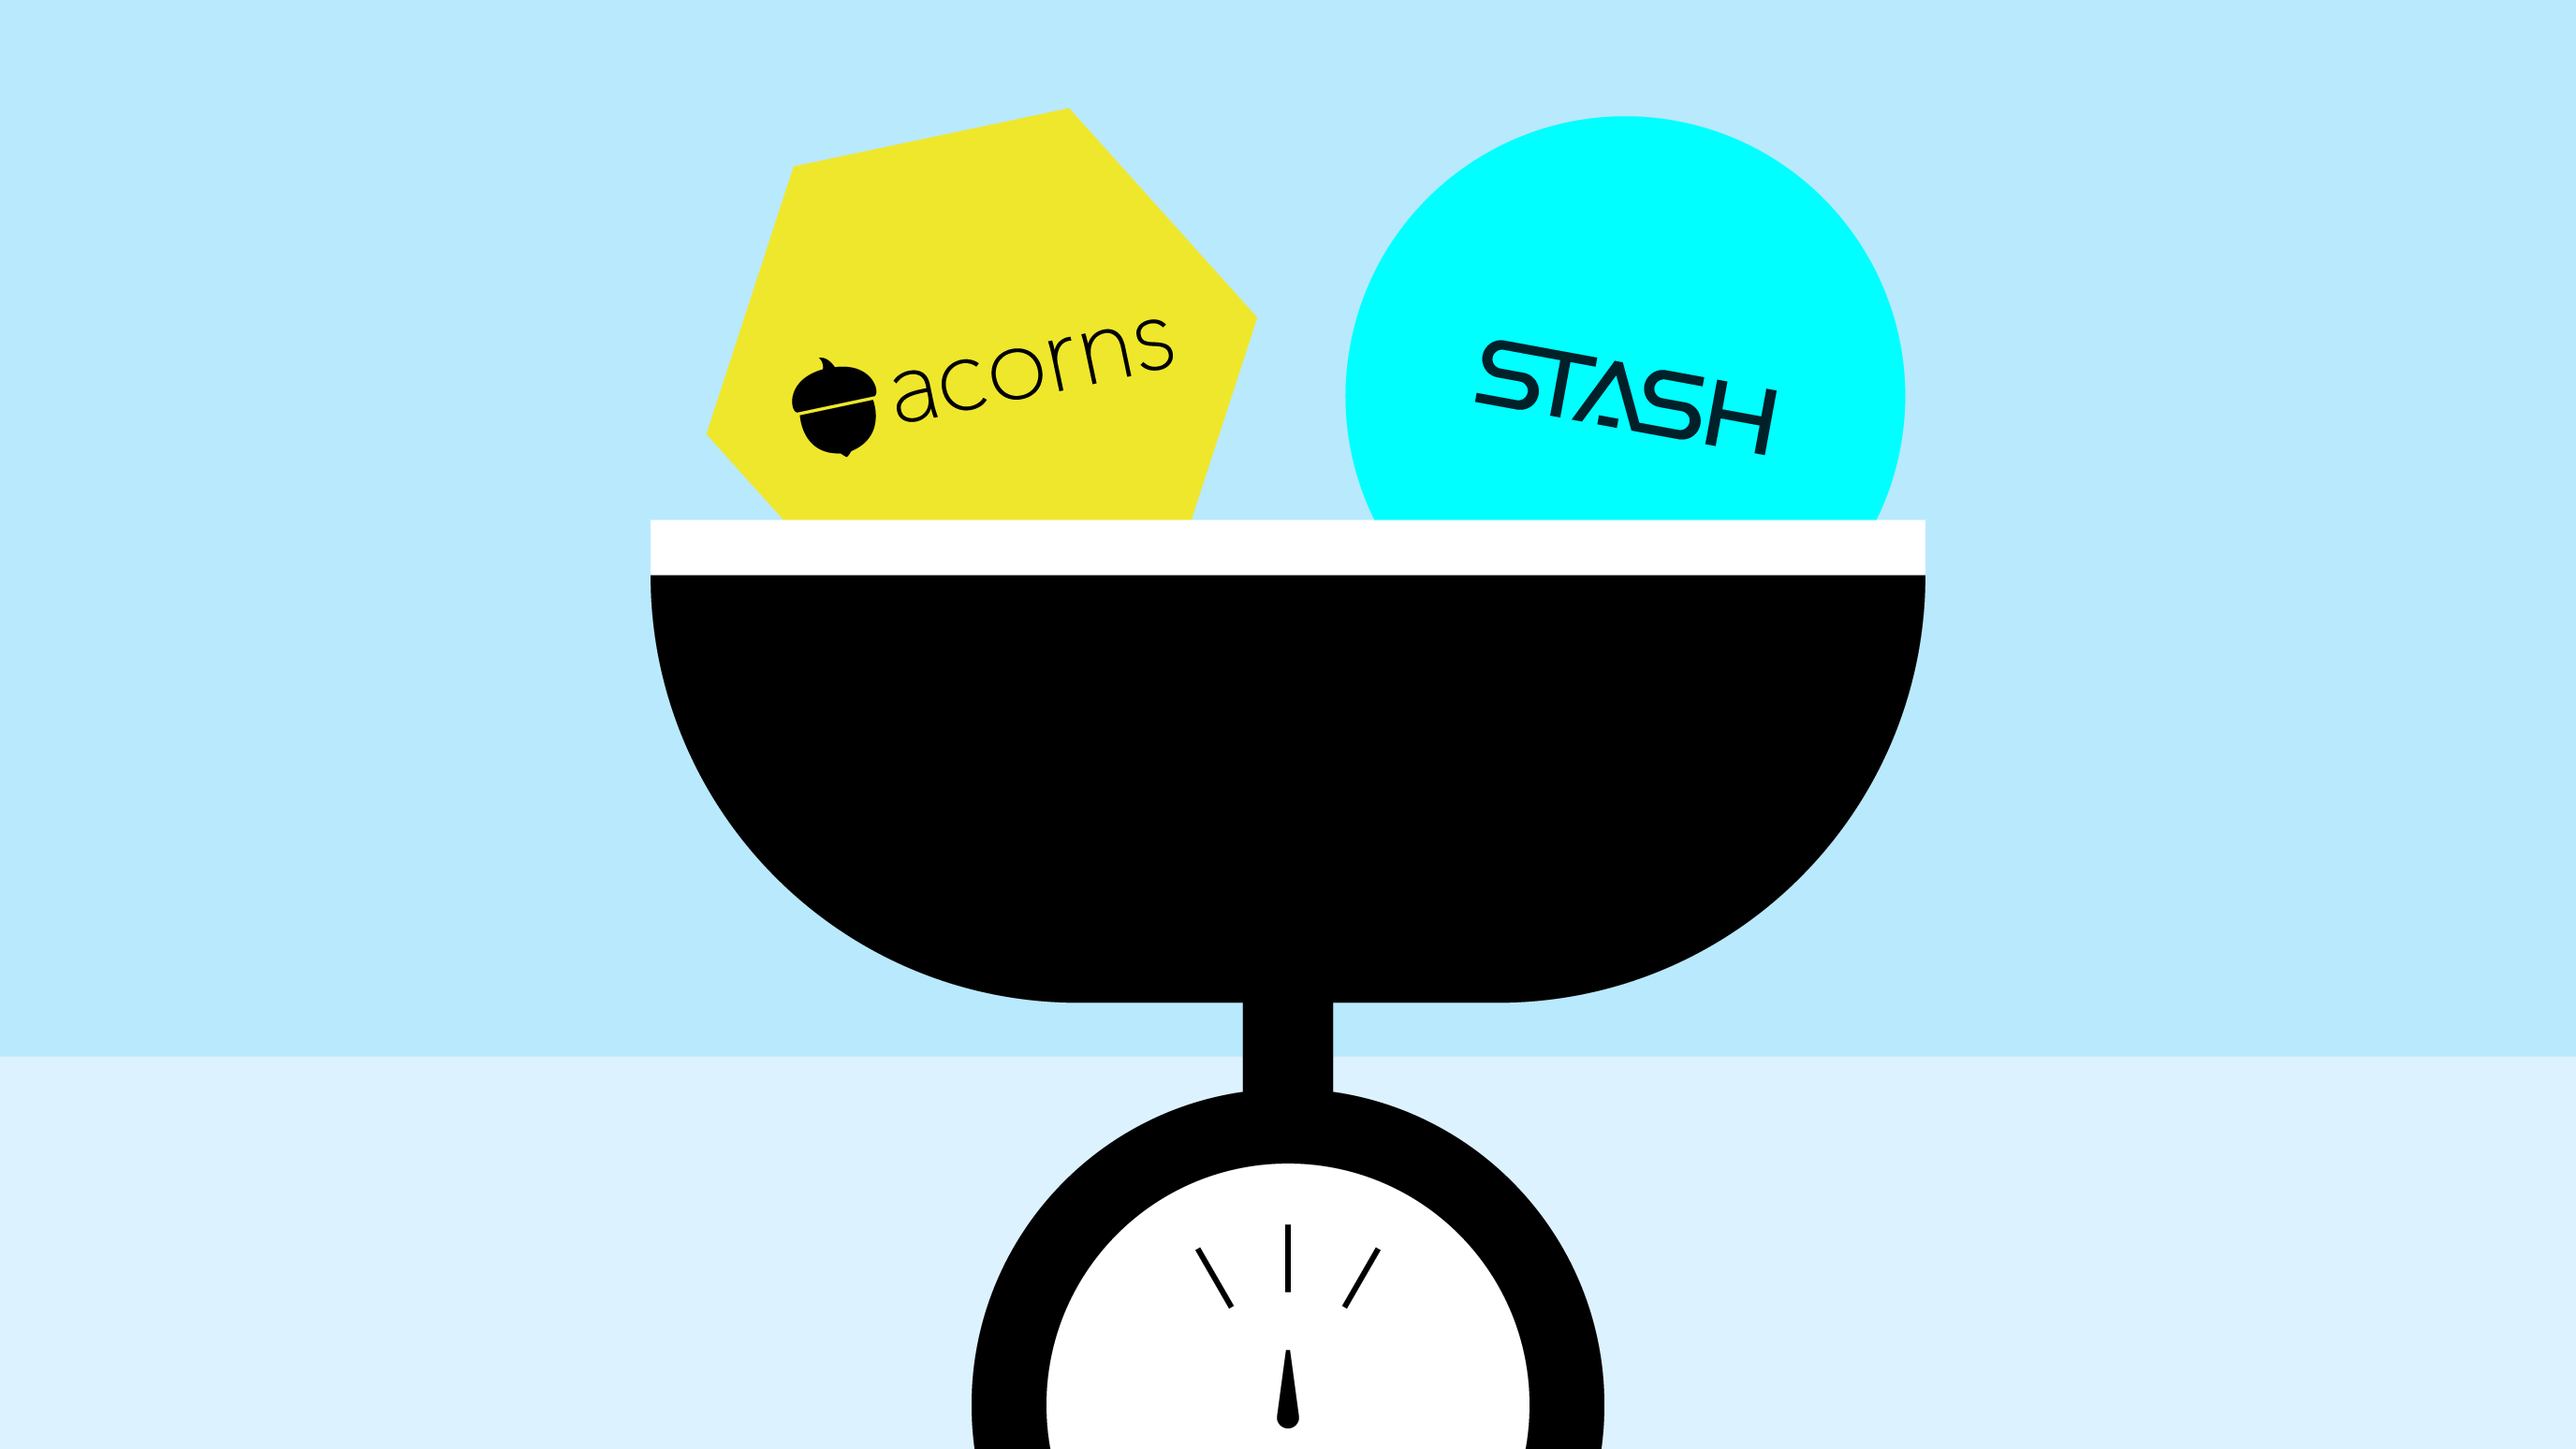 An illustrated scale holds two objects labeled Stash and Acorns, alluding to the topic of comparing Stash vs Acorns, two popular investing apps.